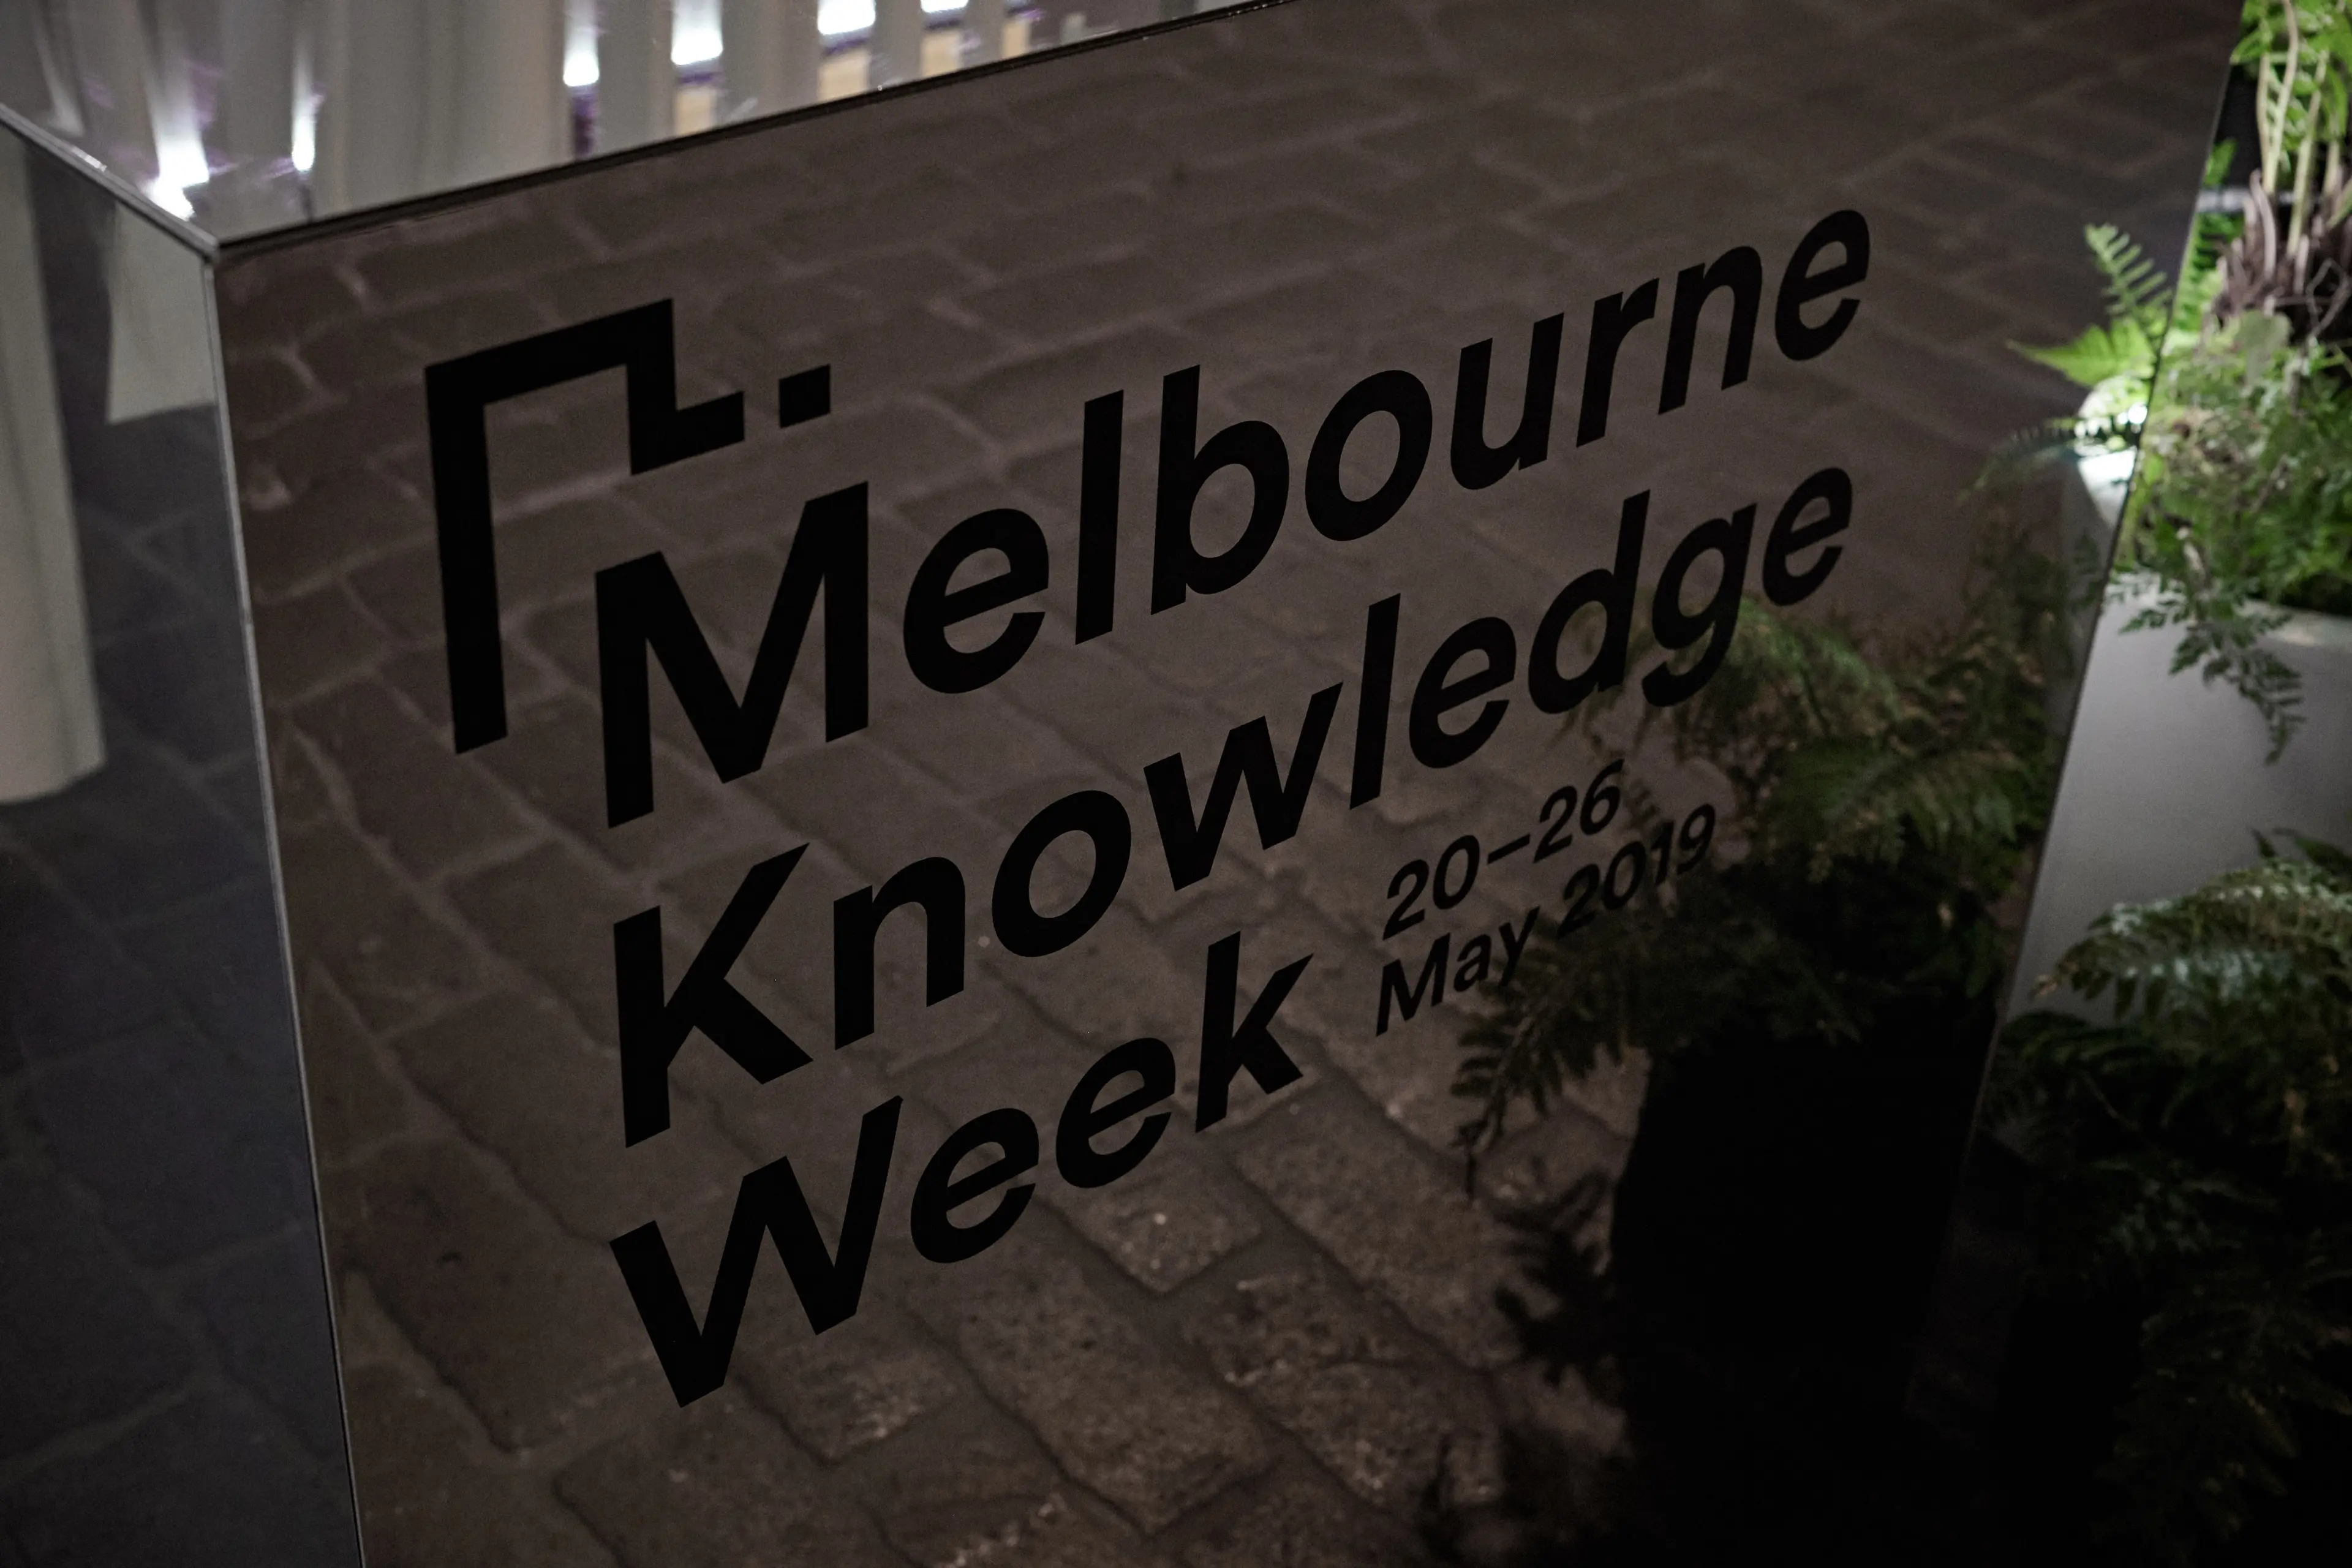 Melbourne Knowledge Week - event management and production, exhibition design, fabrication and installation - Meat Market Art Centre, Australia